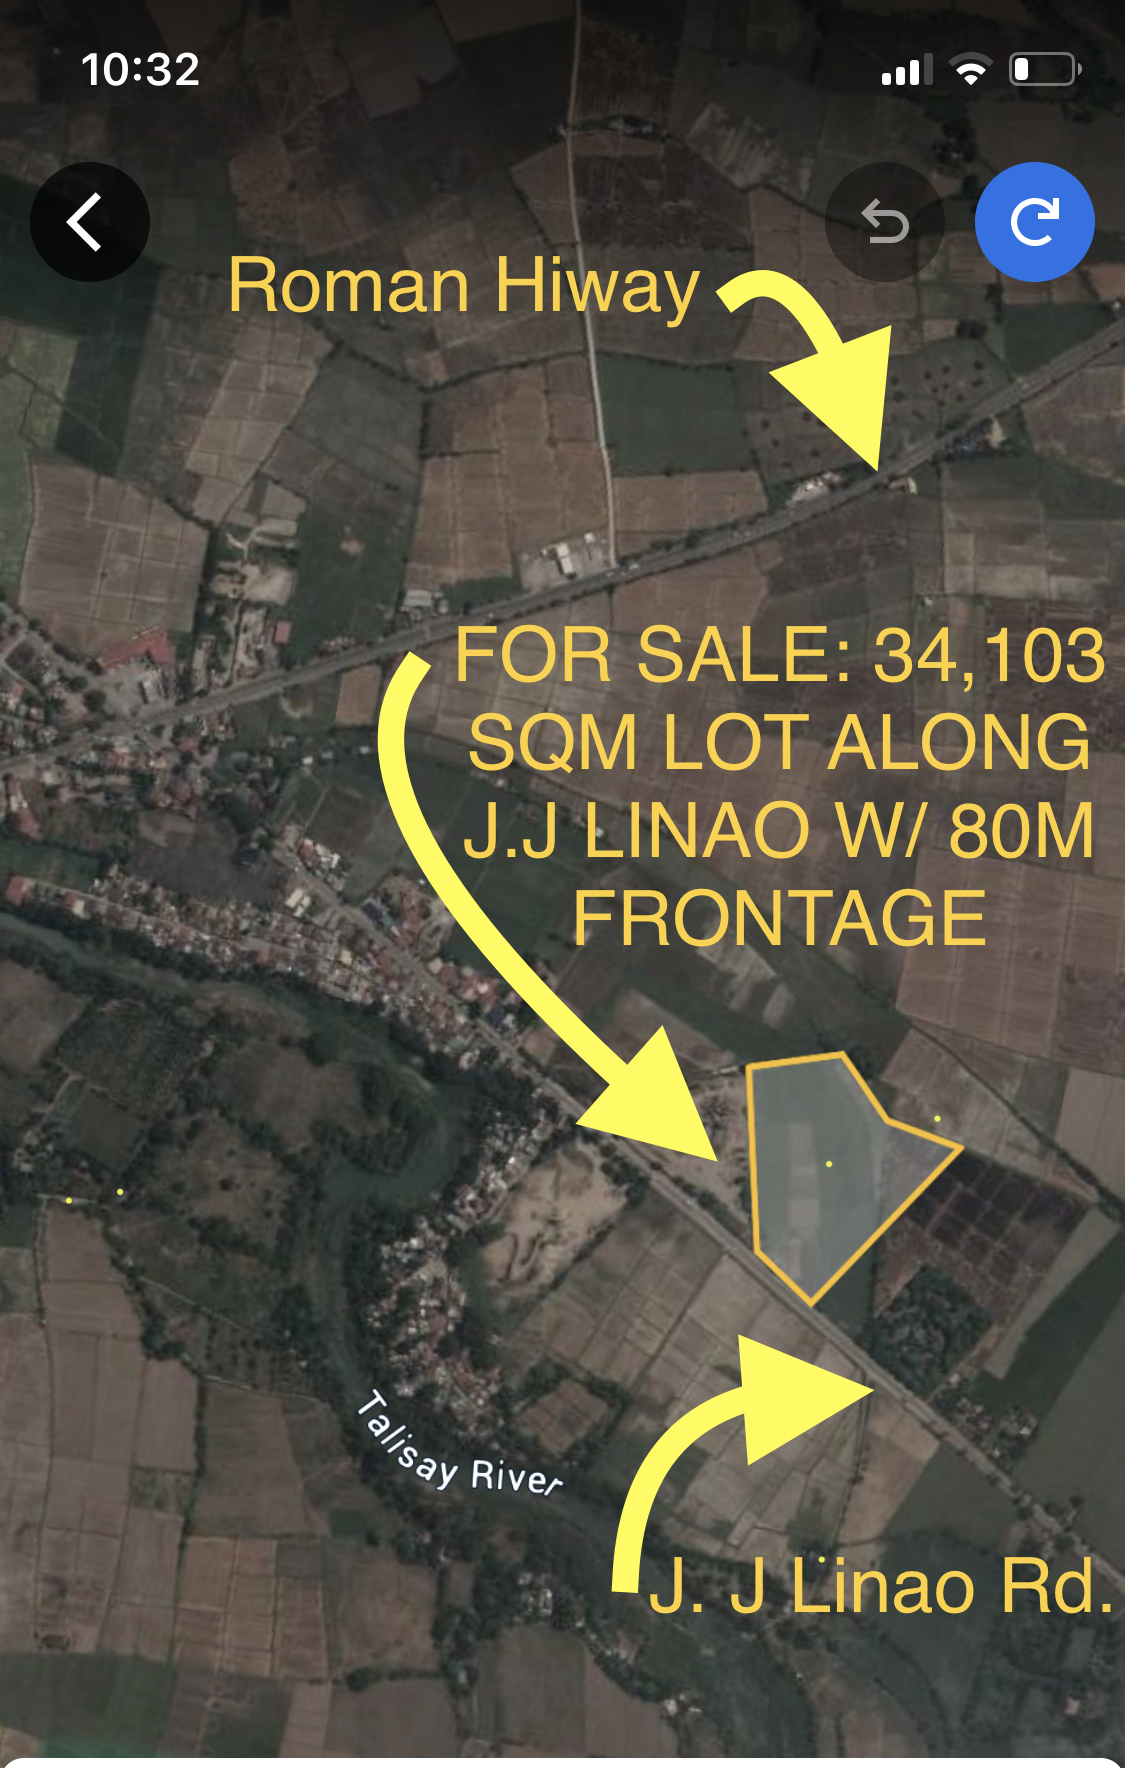 LOT FOR SALE  by Property Avenue!!! A 3.4 Hectare Agricultural Lot in Ala-Uli Pilar, Bataan